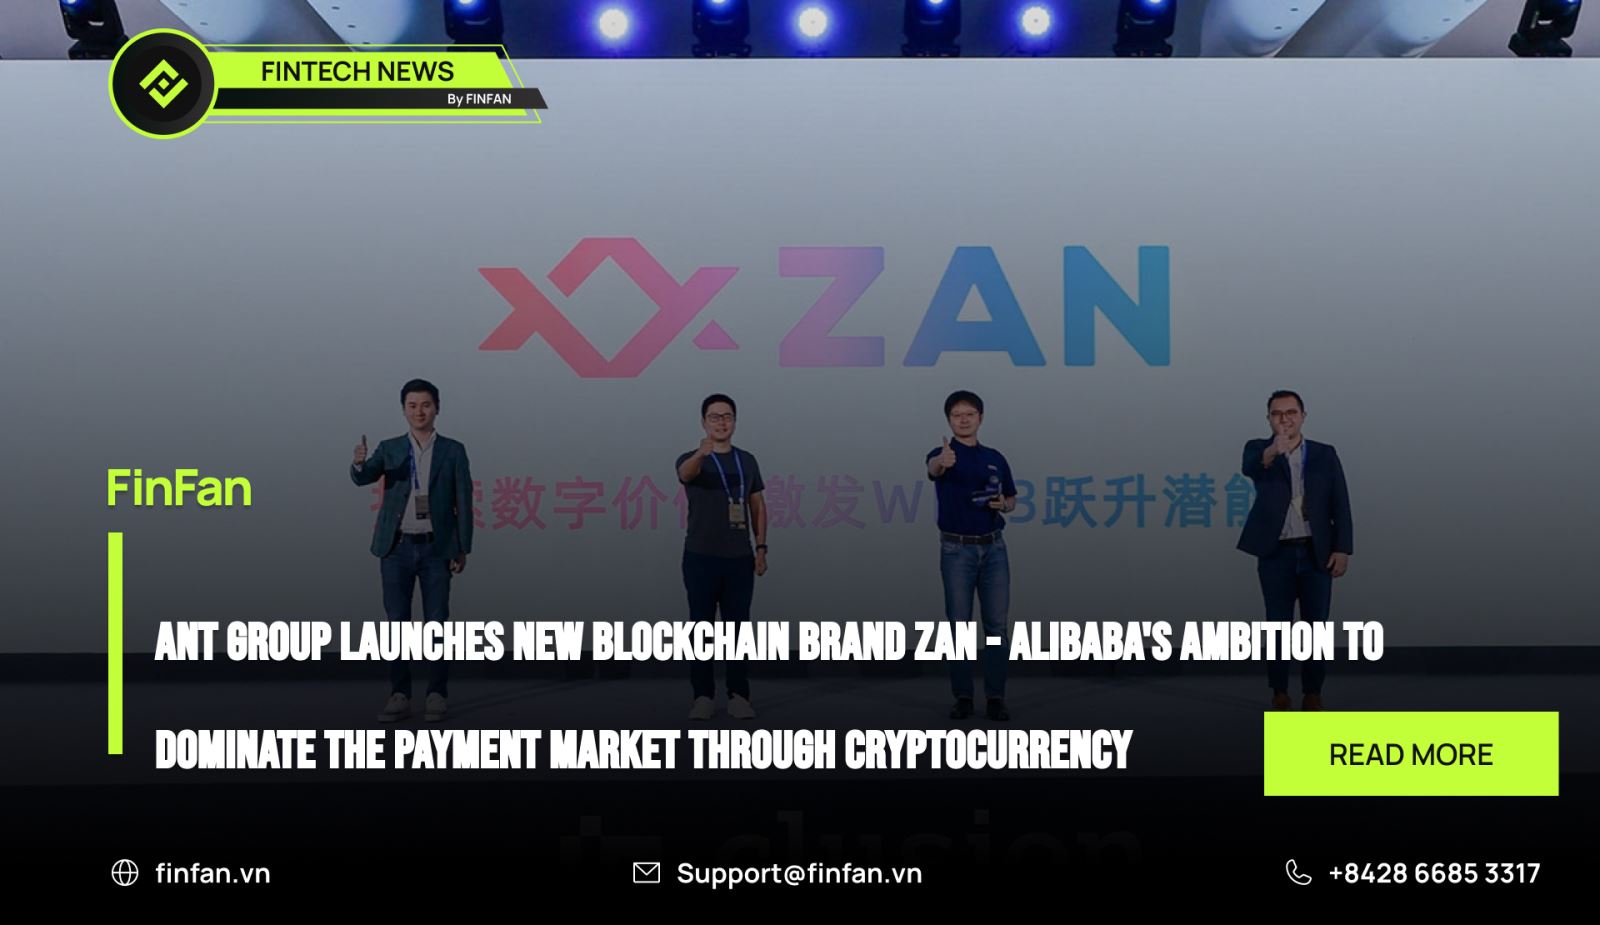 Ant Group Launches New Blockchain Brand ZAN - Alibaba's ambition to dominate the payment market through cryptocurrency